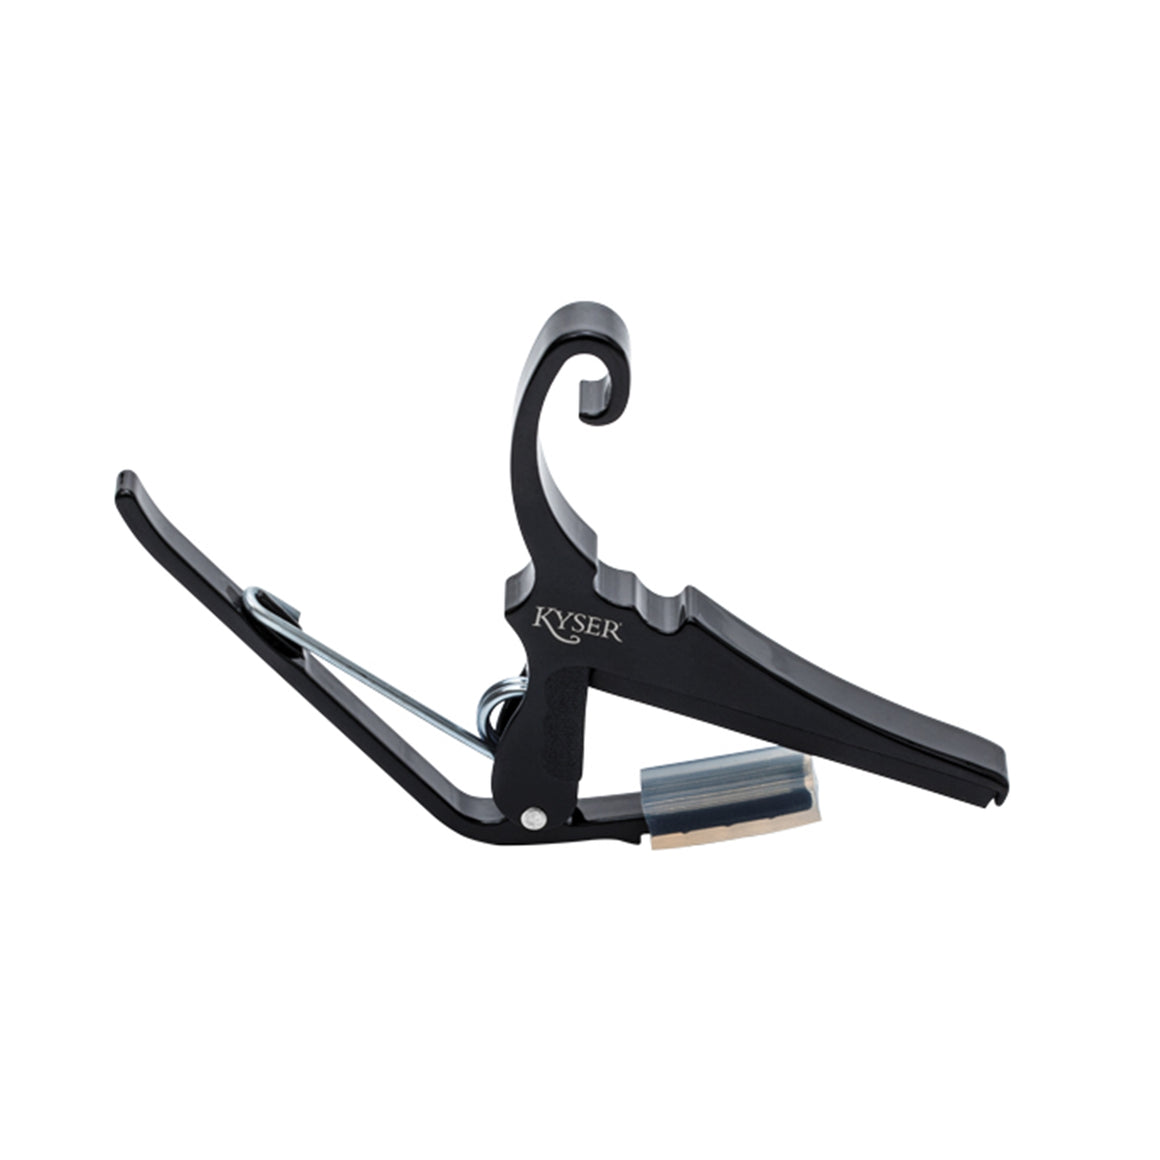 KYSER KGC Quick-Change Capo for Classical Guitar